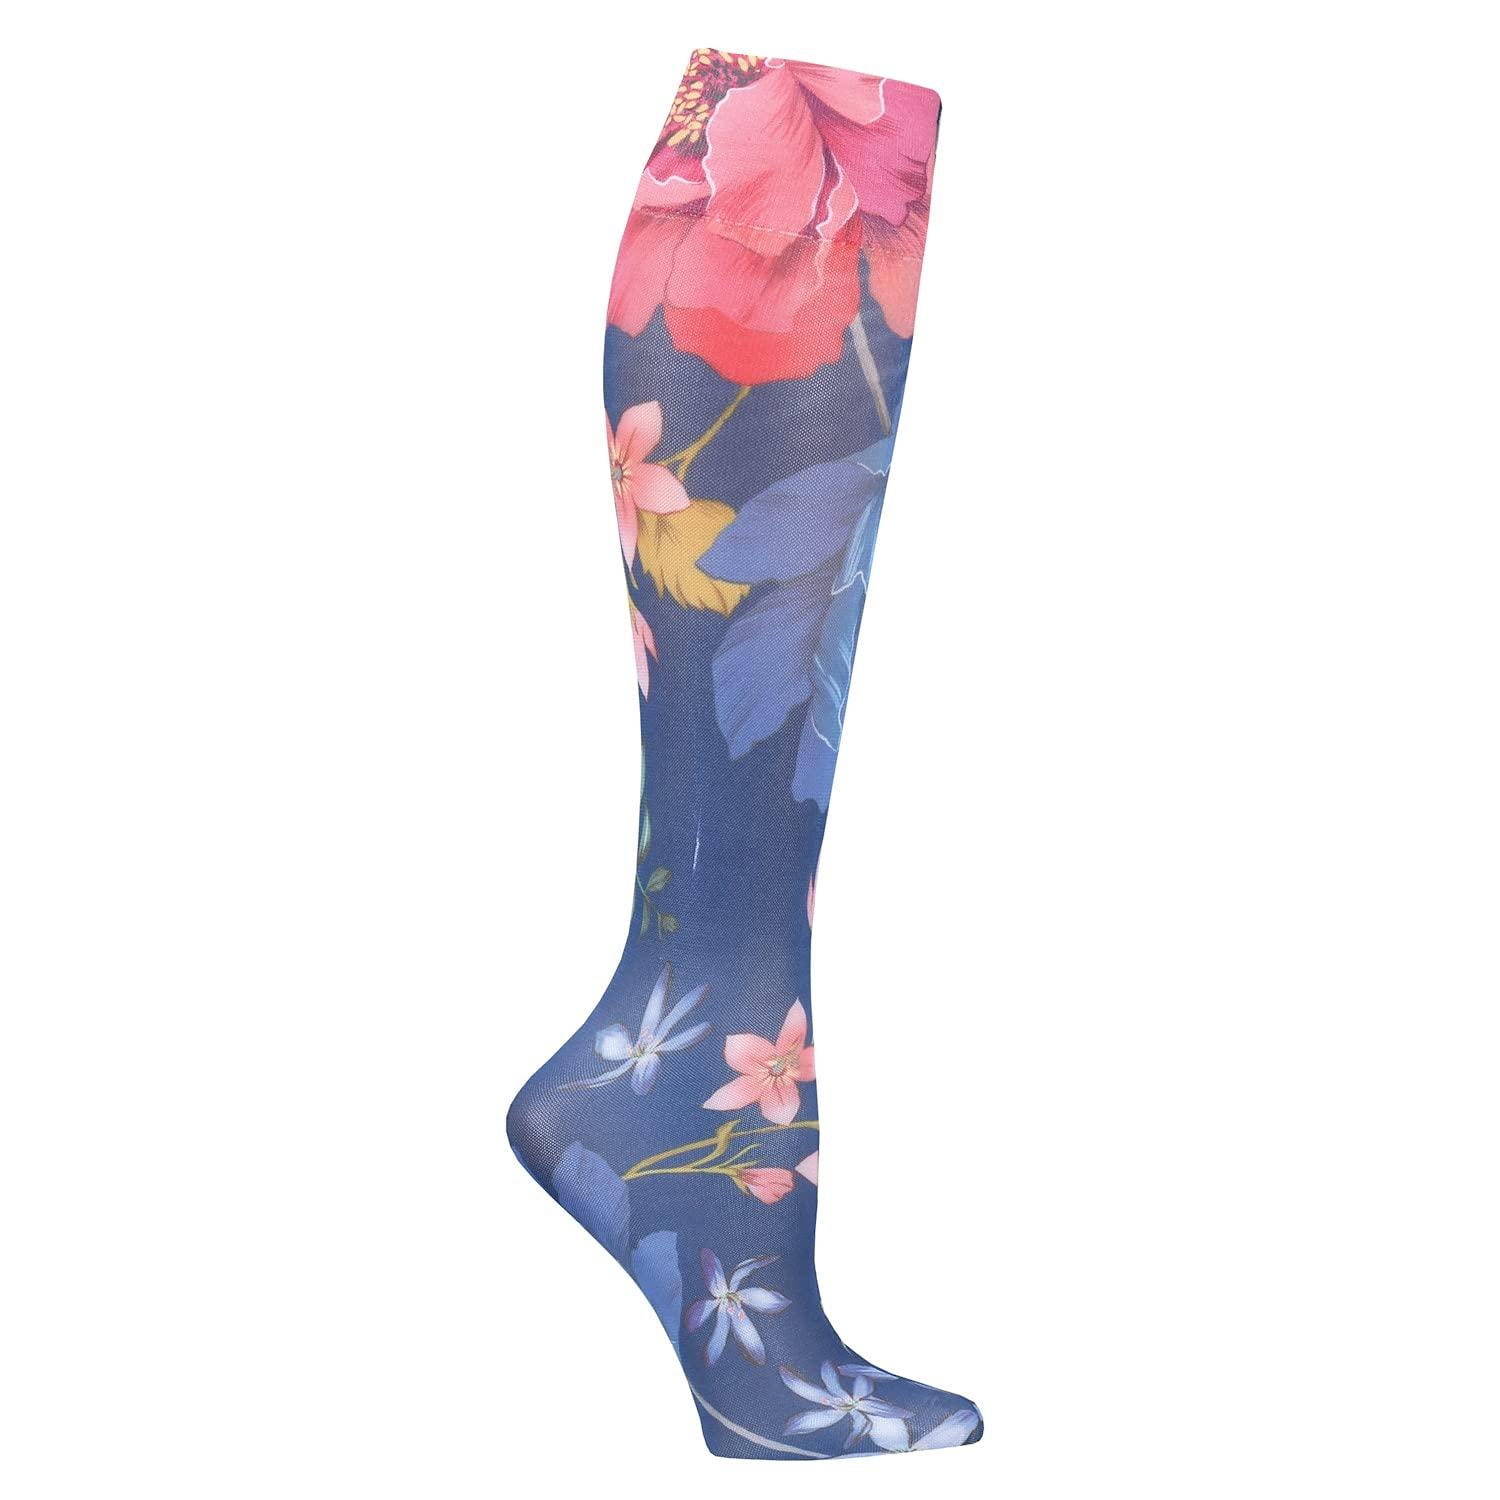 Celeste Stein® Women's Printed Closed Toe Mild Compression Knee High  Stockings